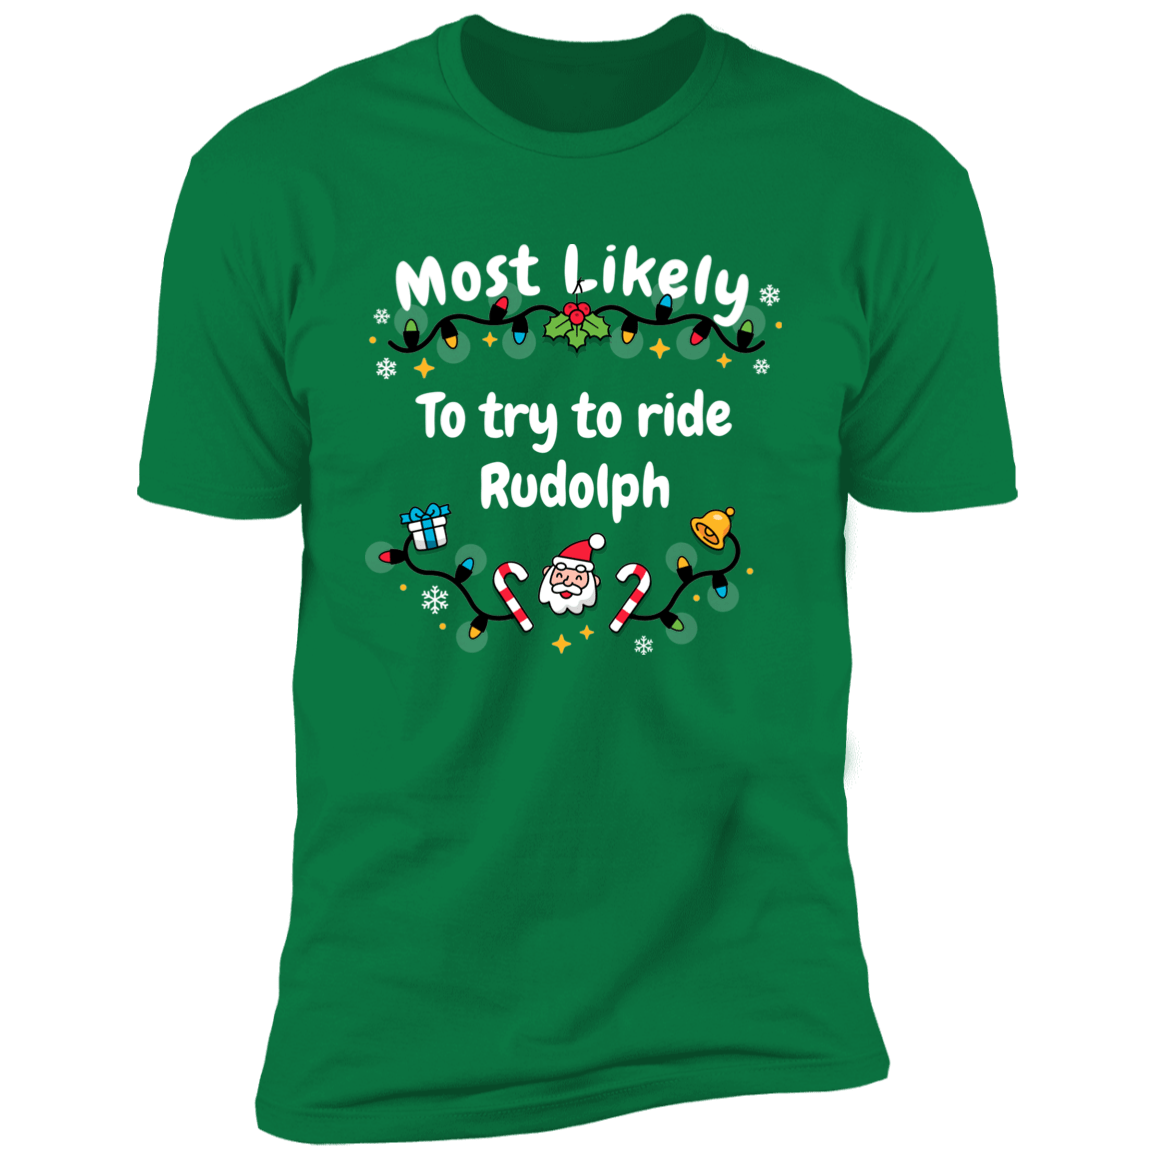 Most Likely To try To Ride Rudolph &amp; Rudolph Deluxe Unisex Tees